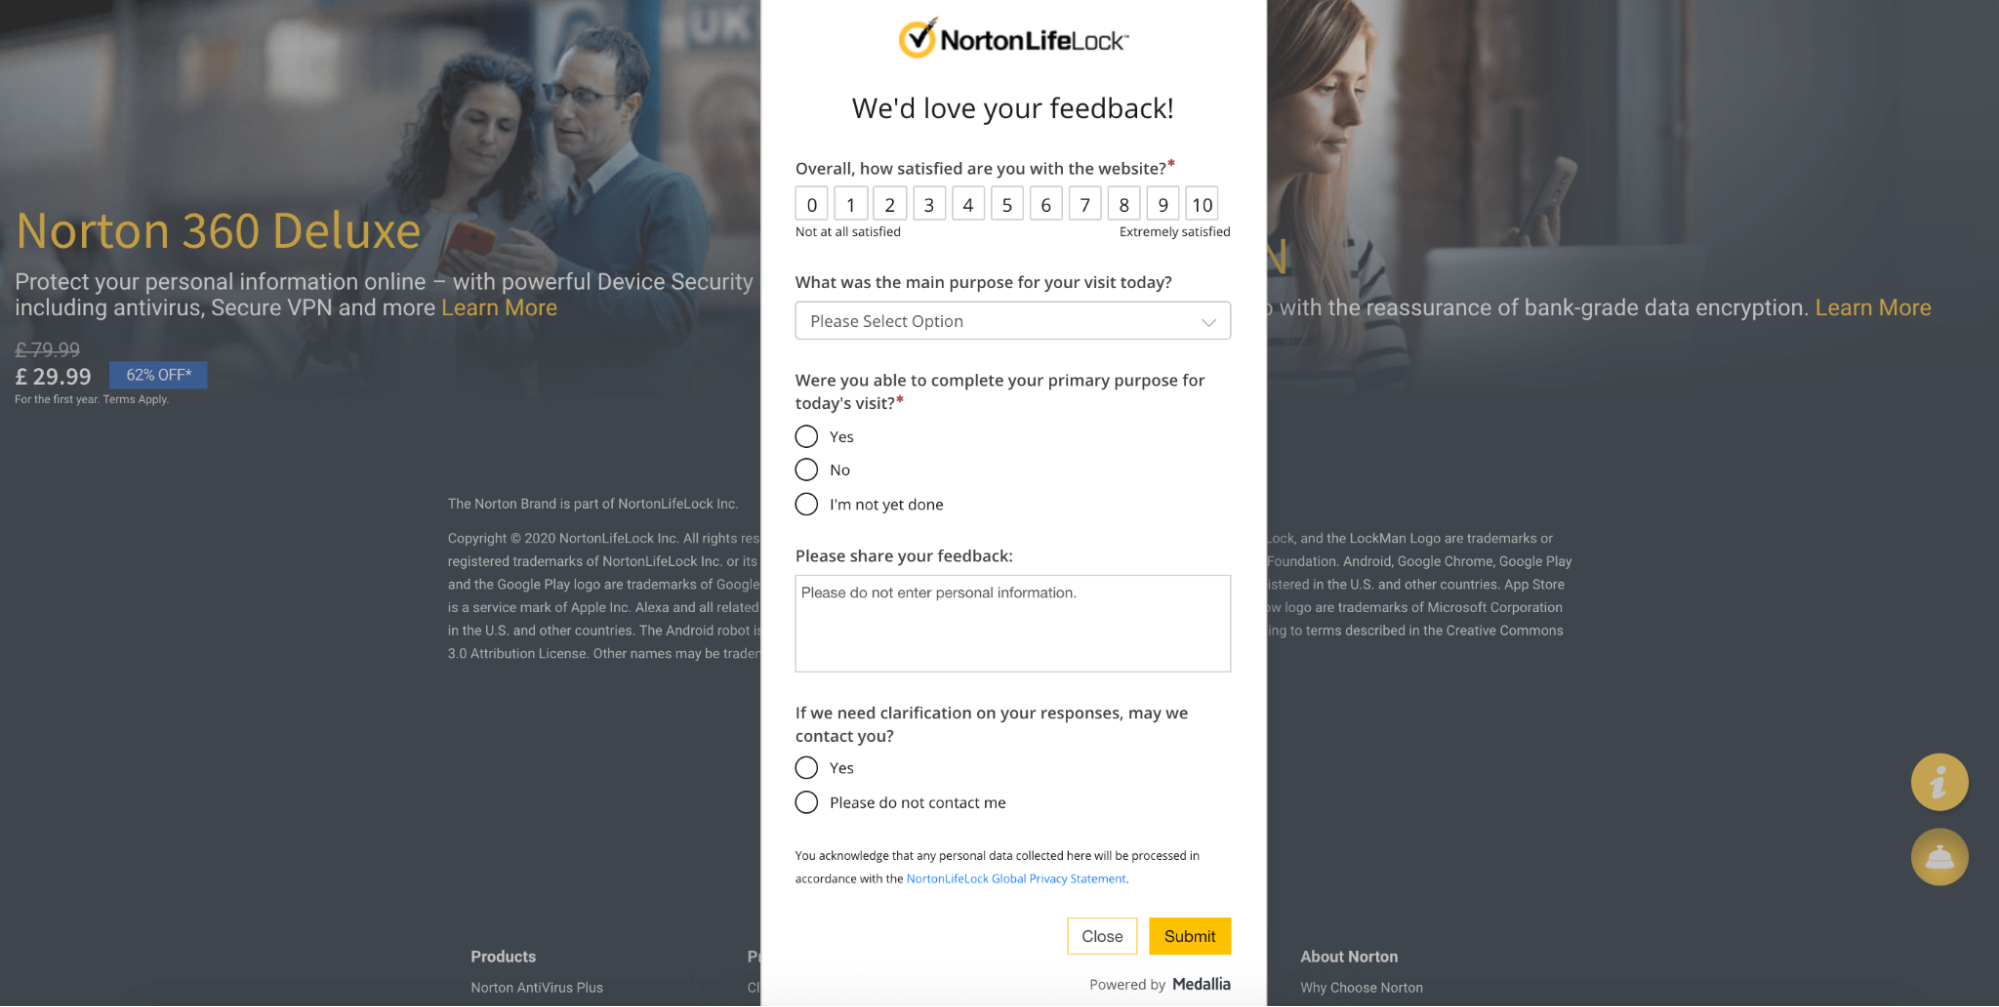  This is the image of a website feedback survey popup shown on Norton’s website asking users to rate their satisfaction with the website. 